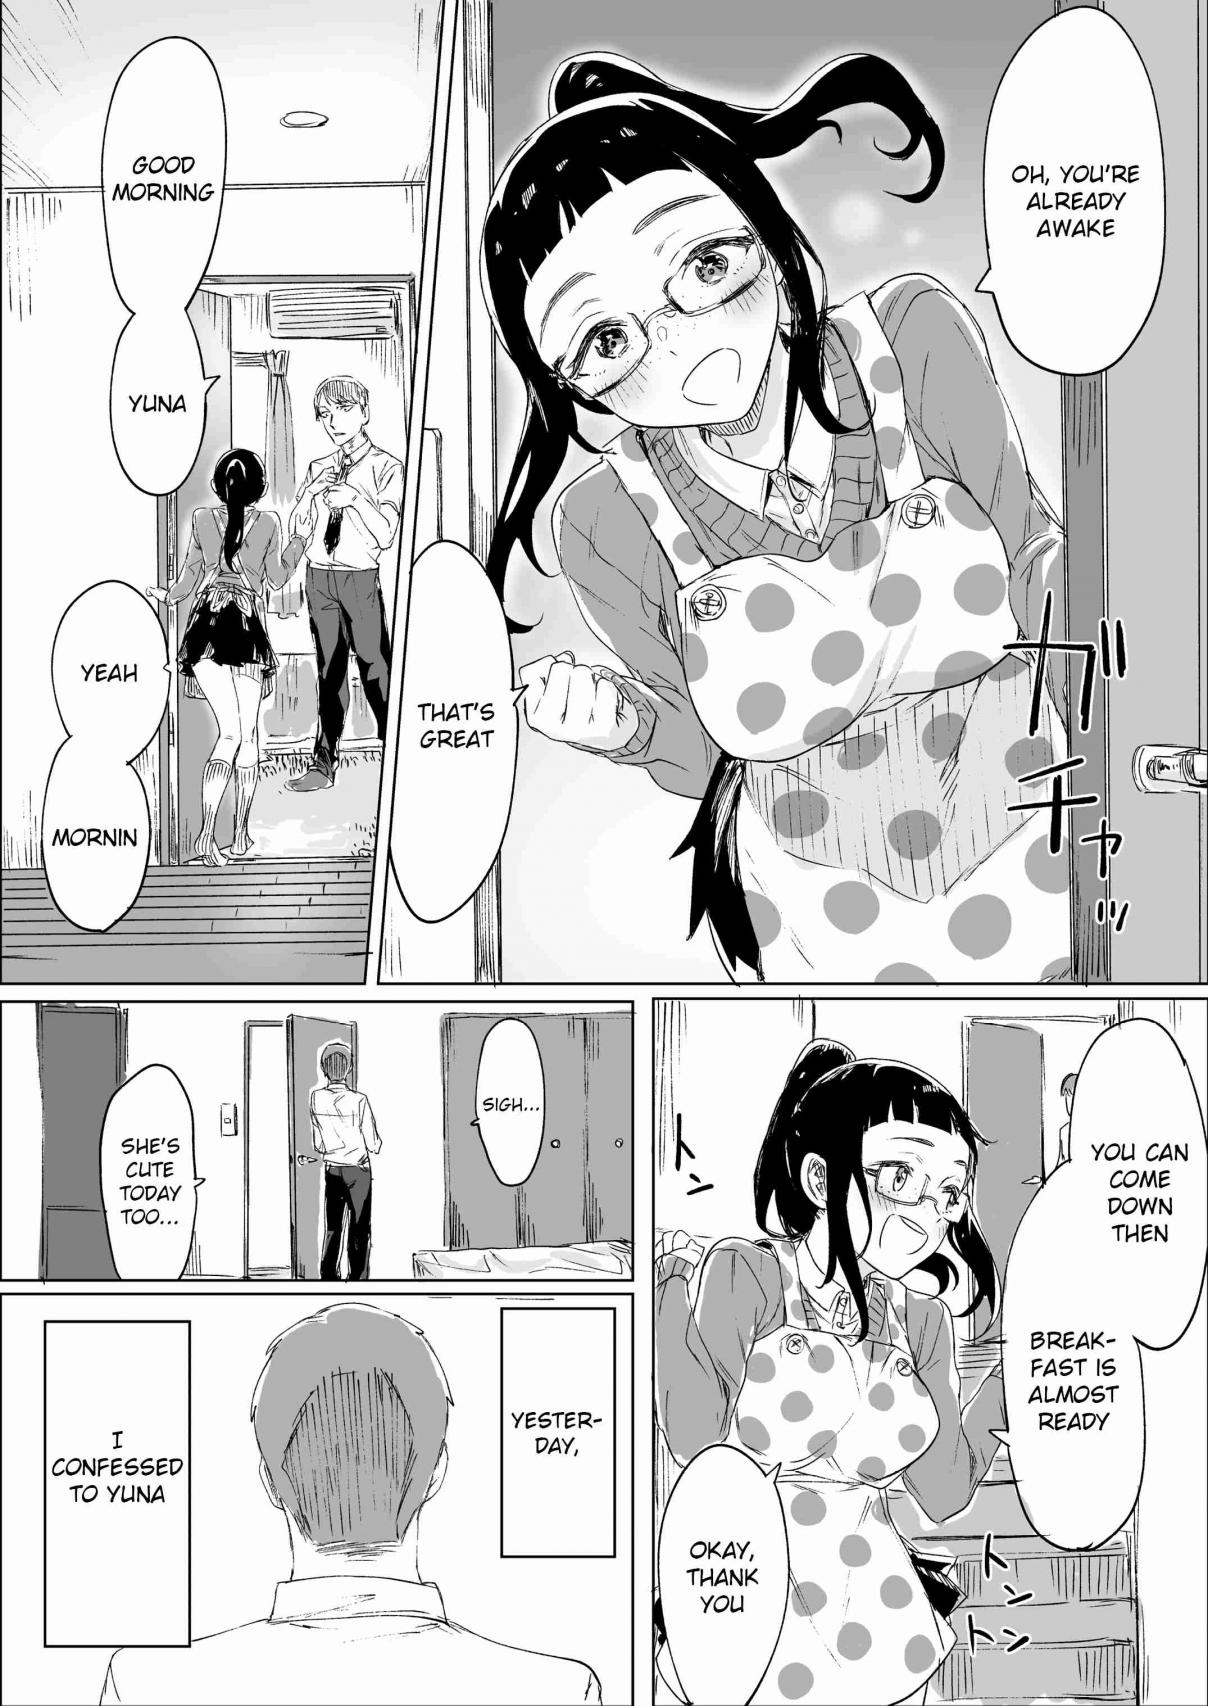 Confessing to my Childhood Friend who’s Worried she’s Plain Vol. 1 Ch. 1